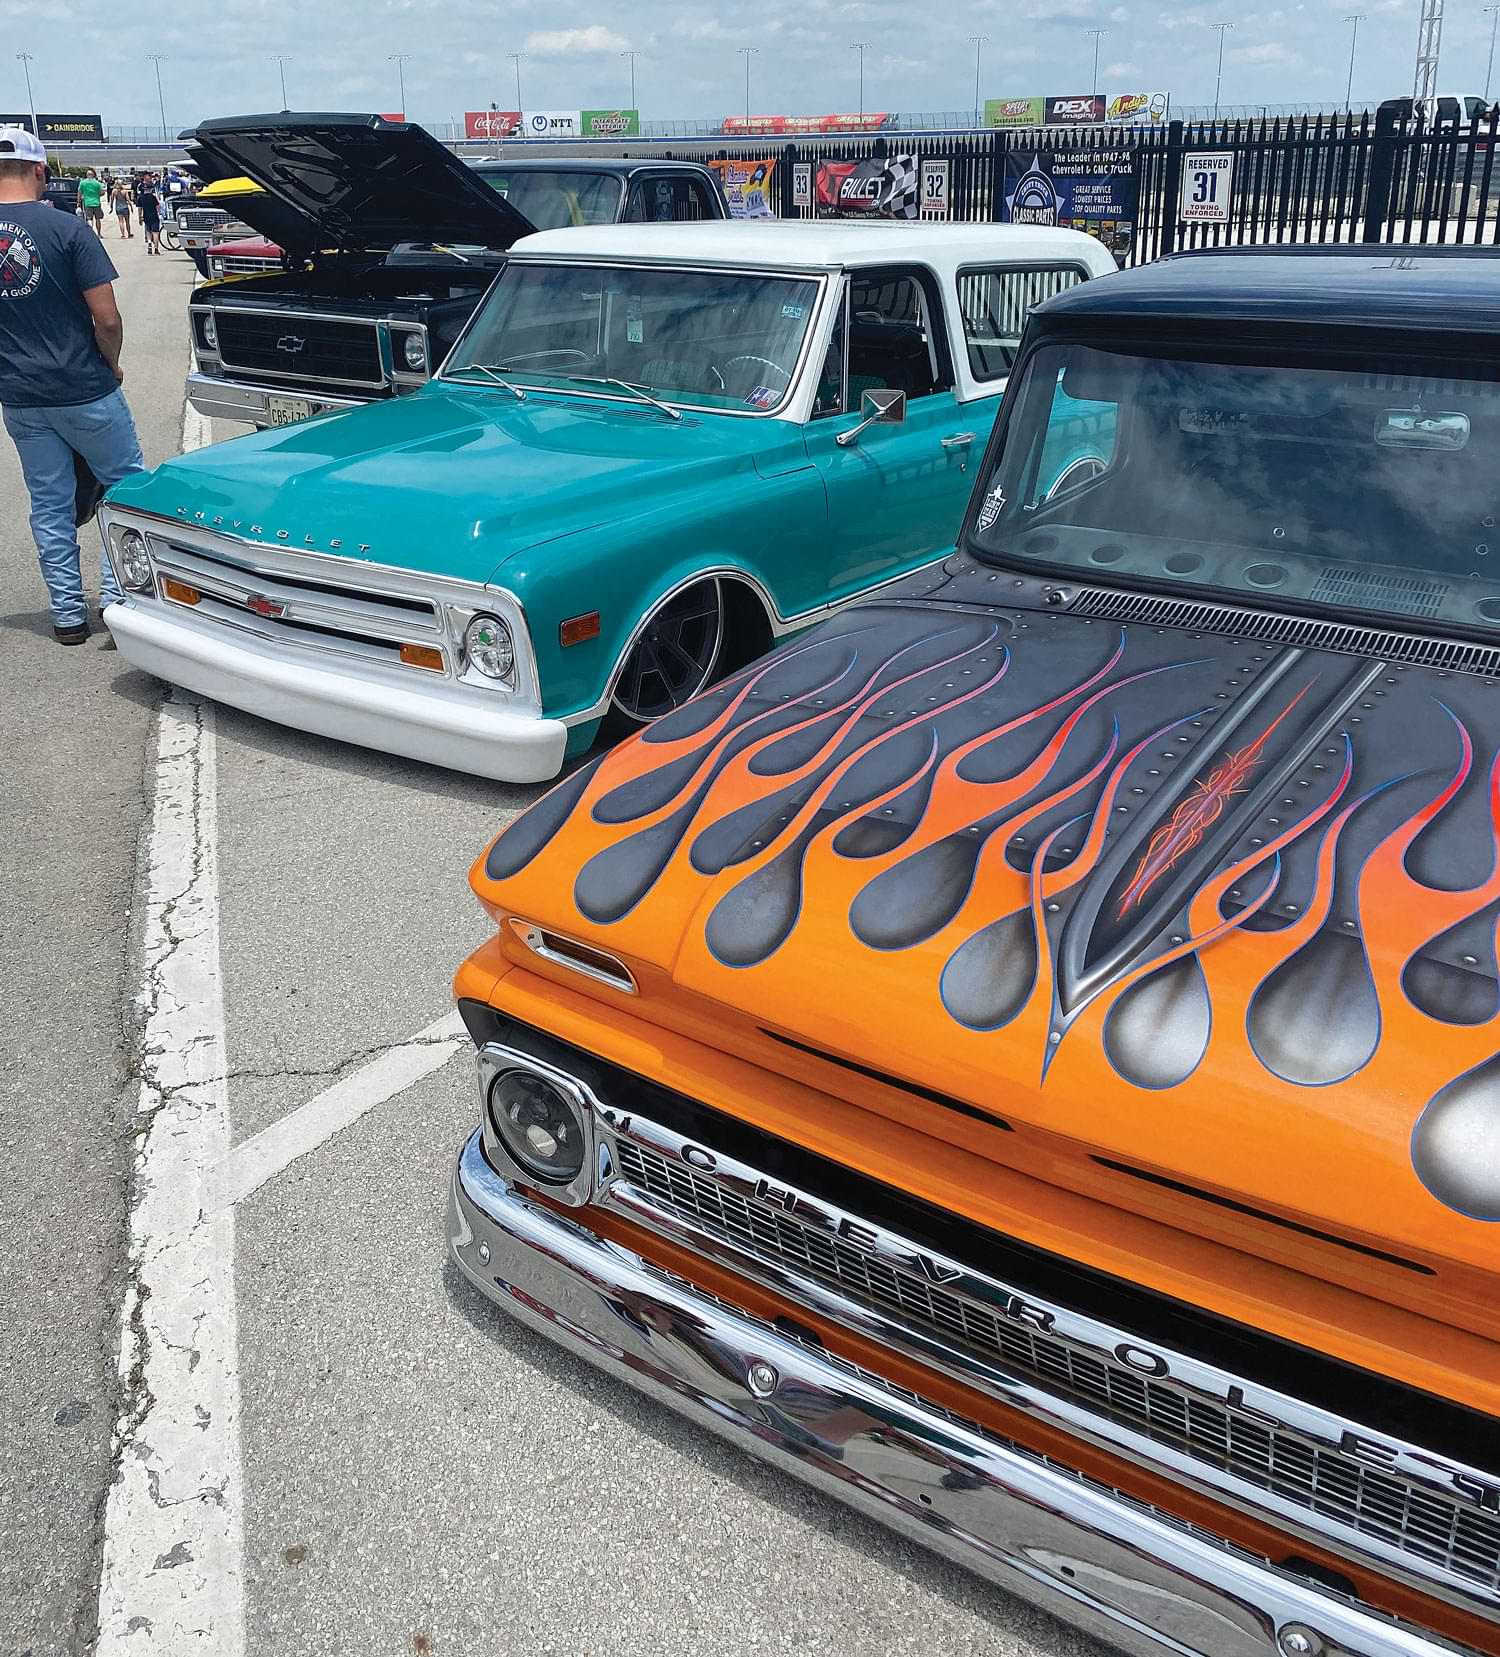 Front of C10 with flame paint job